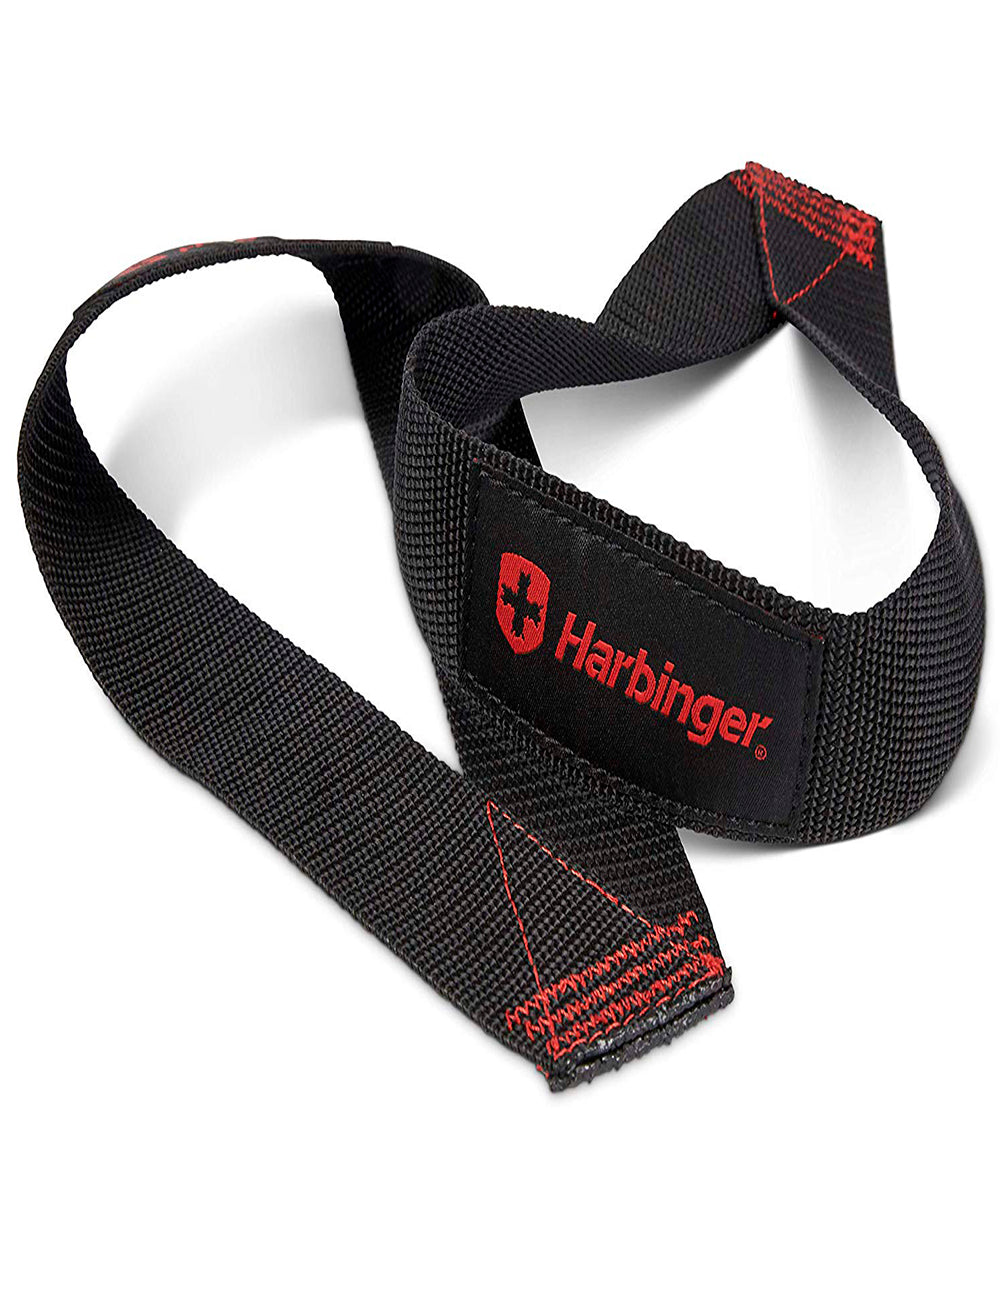 Harbinger Olympic Nylon Weightlifting Straps, Color Black